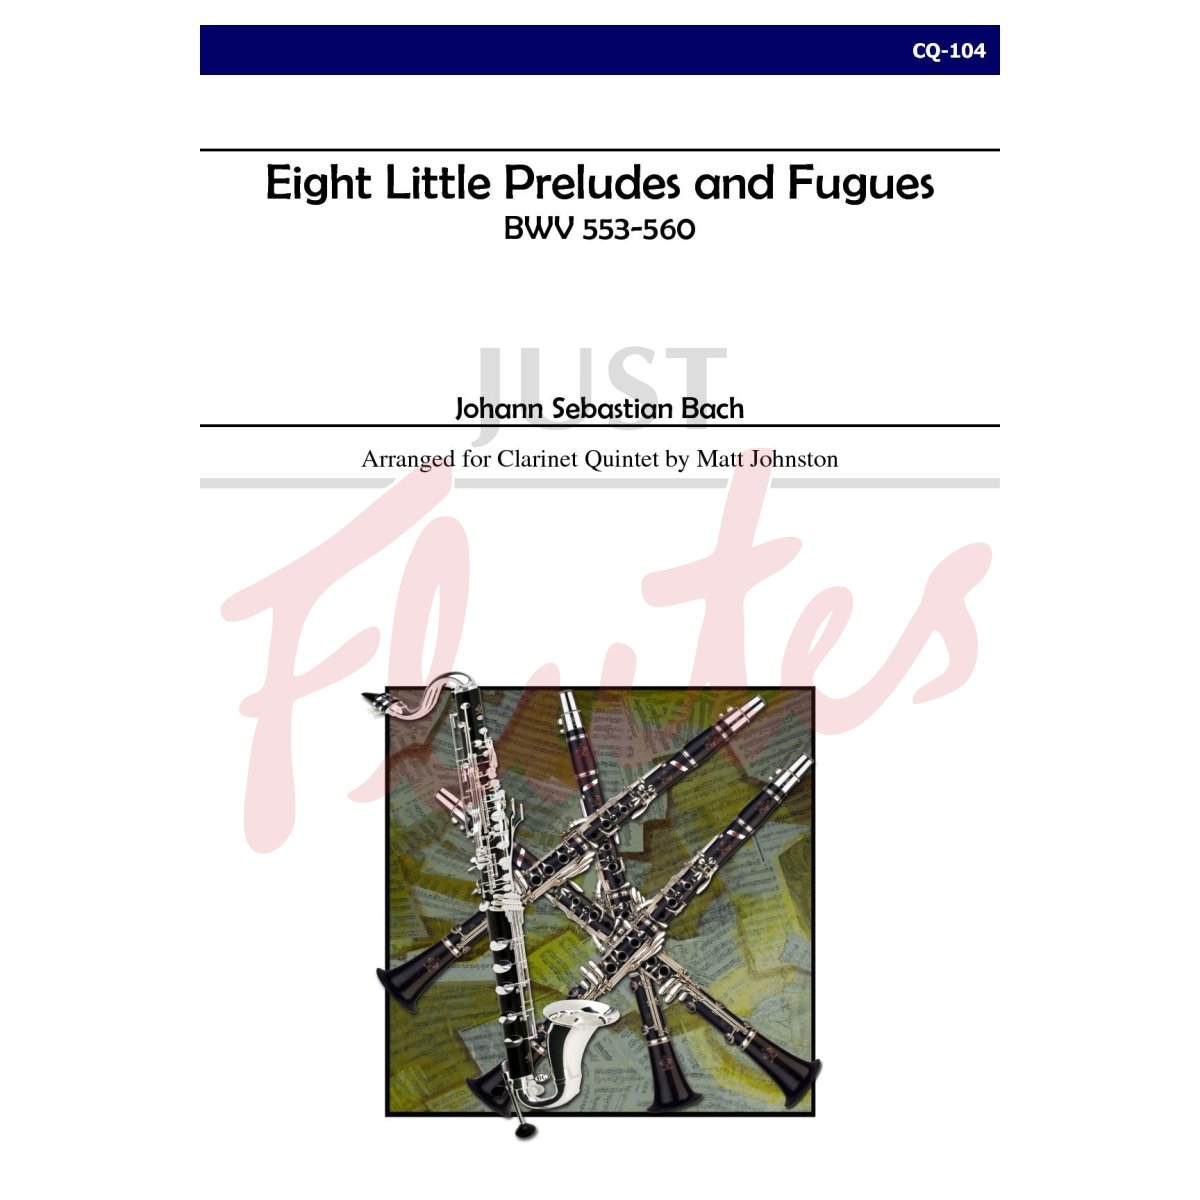 Eight Little Preludes and Fugues for Clarinet Quartet